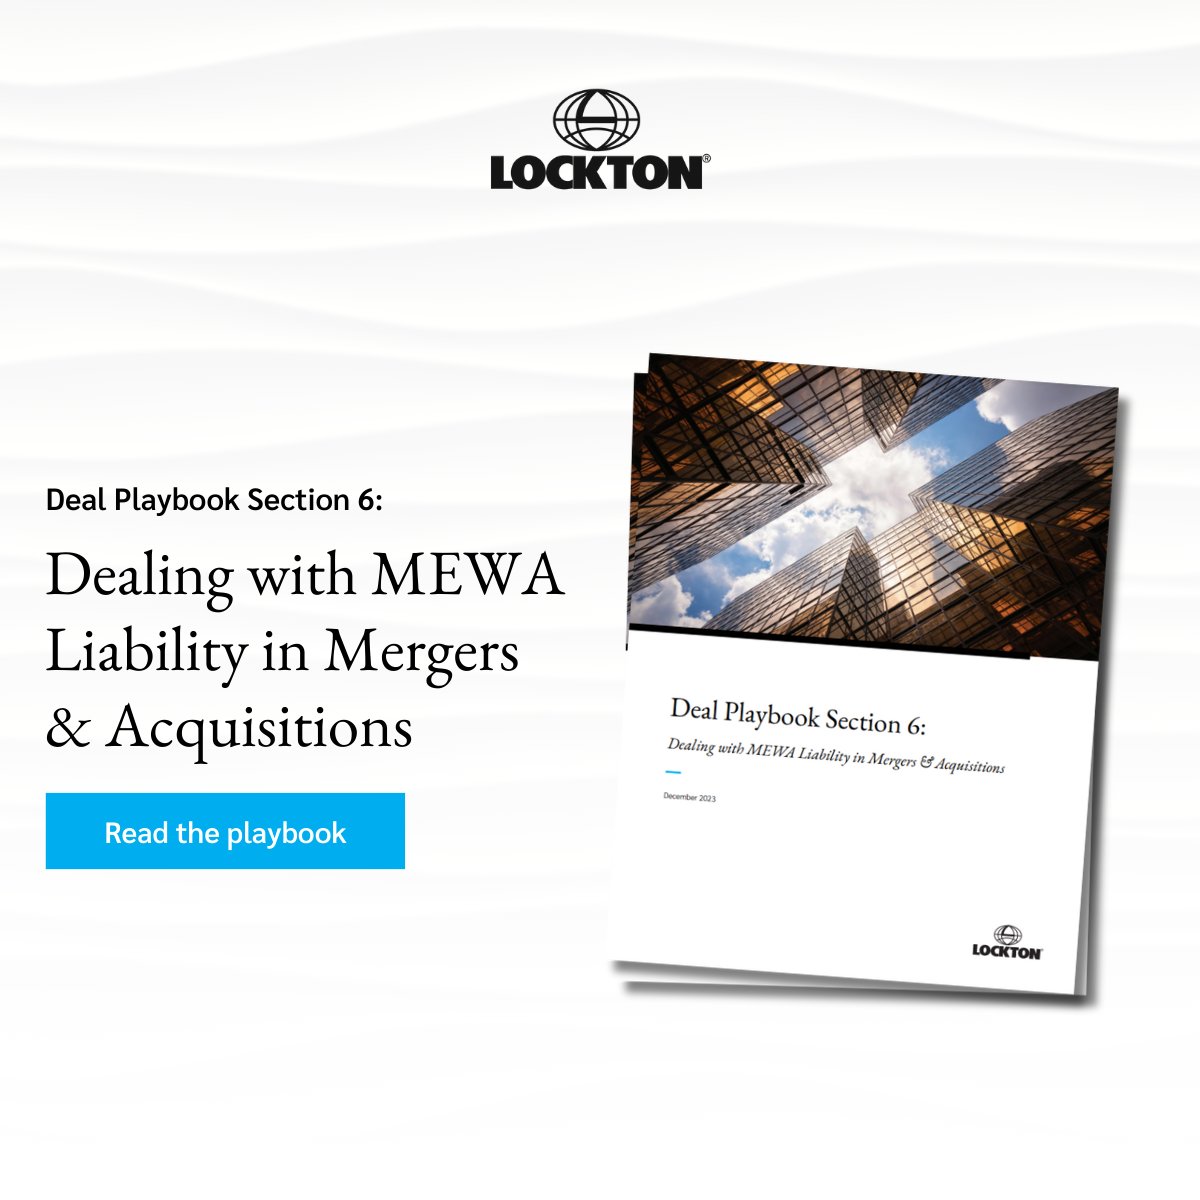 Our experts explain the importance of addressing Multiple Employer Welfare Arrangements (MEWAs) that may currently exist and ensuring that inadvertent MEWAs are not created due to an M&A transaction. Read our recommendations to ensure a successful outcome. global.lockton.com/us/en/news-ins…